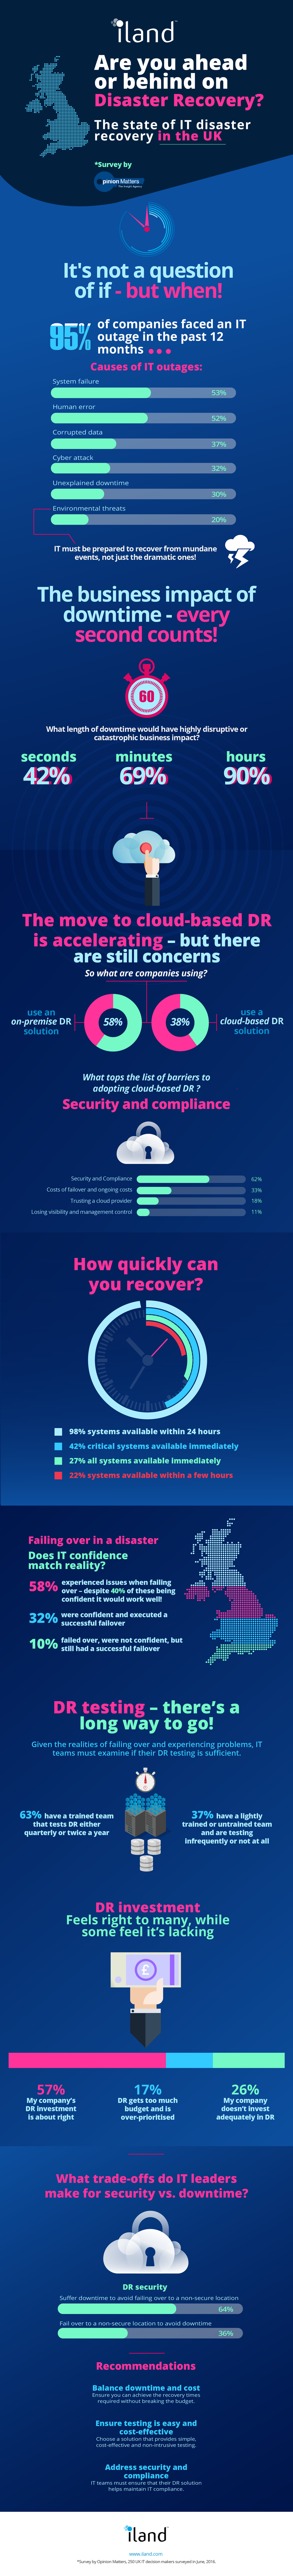 Infographic: Are you ahead or behind on Disaster Recovery?